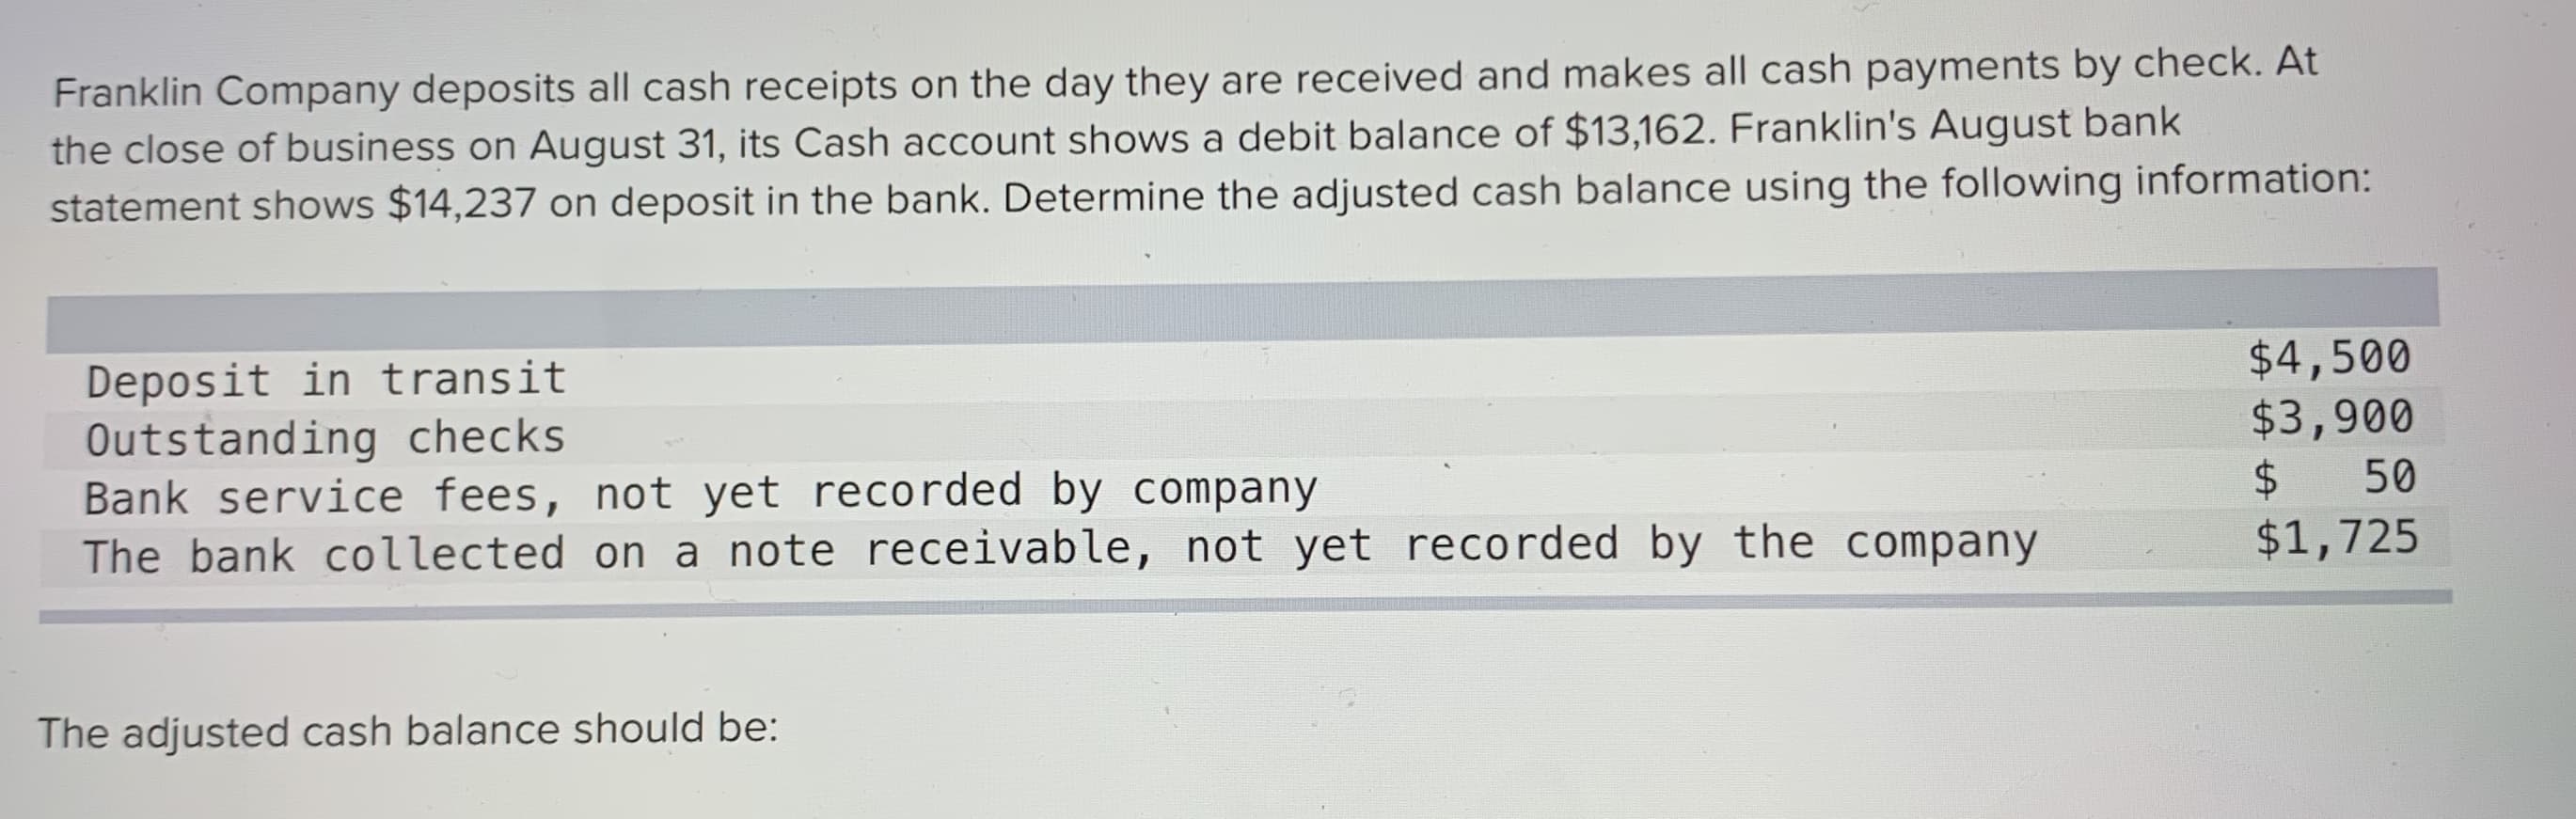 Franklin Company deposits all cash receipts on the day they are received and makes all cash payments by check. At
the close of business on August 31, its Cash account shows a debit balance of $13,162. Franklin's August bank
statement shows $14,237 on deposit in the bank. Determine the adjusted cash balance using the following information:
Deposit in transit
Outstanding checks
Bank service fees, not yet recorded by company
The bank collected on a note receivable, not yet recorded by the company
$4,500
$3,900
24
$1,725
50
The adjusted cash balance should be:
